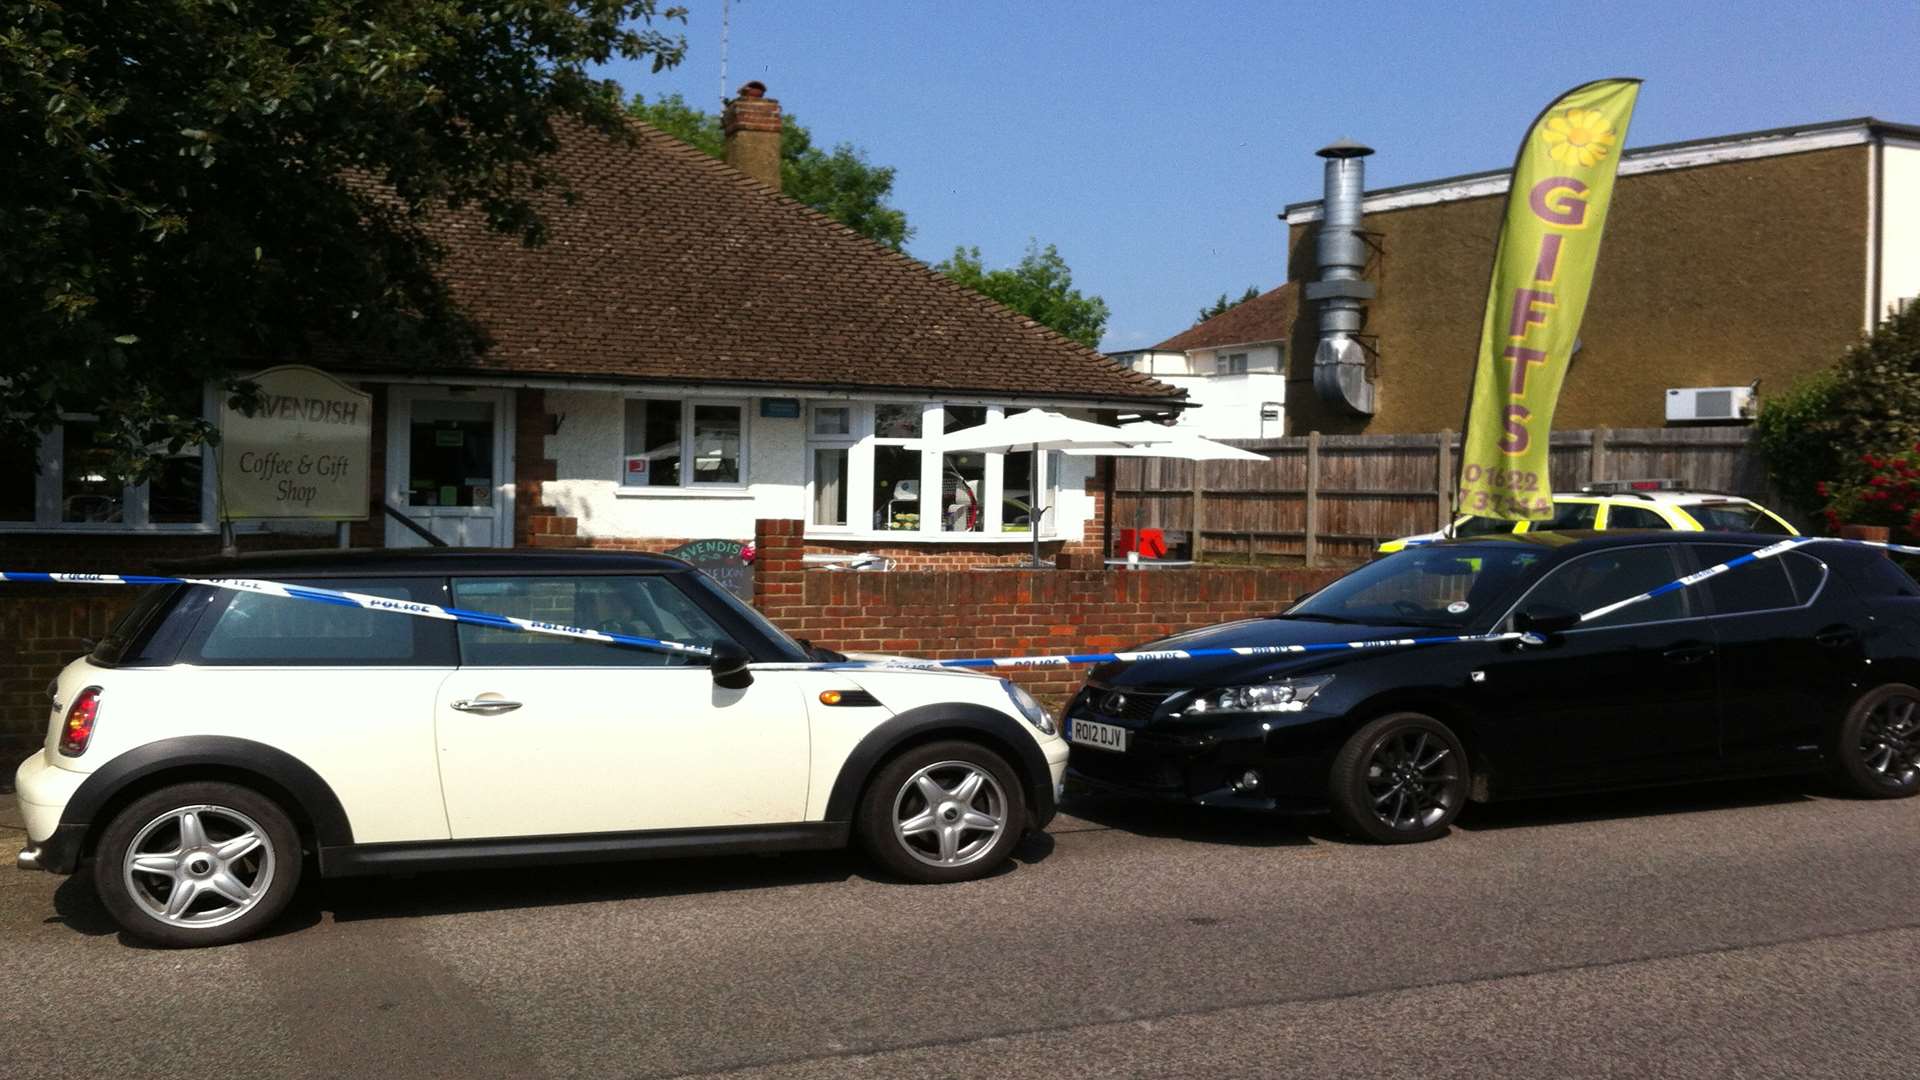 Police cordon at the scene of an unexploded bomb in Bearsted